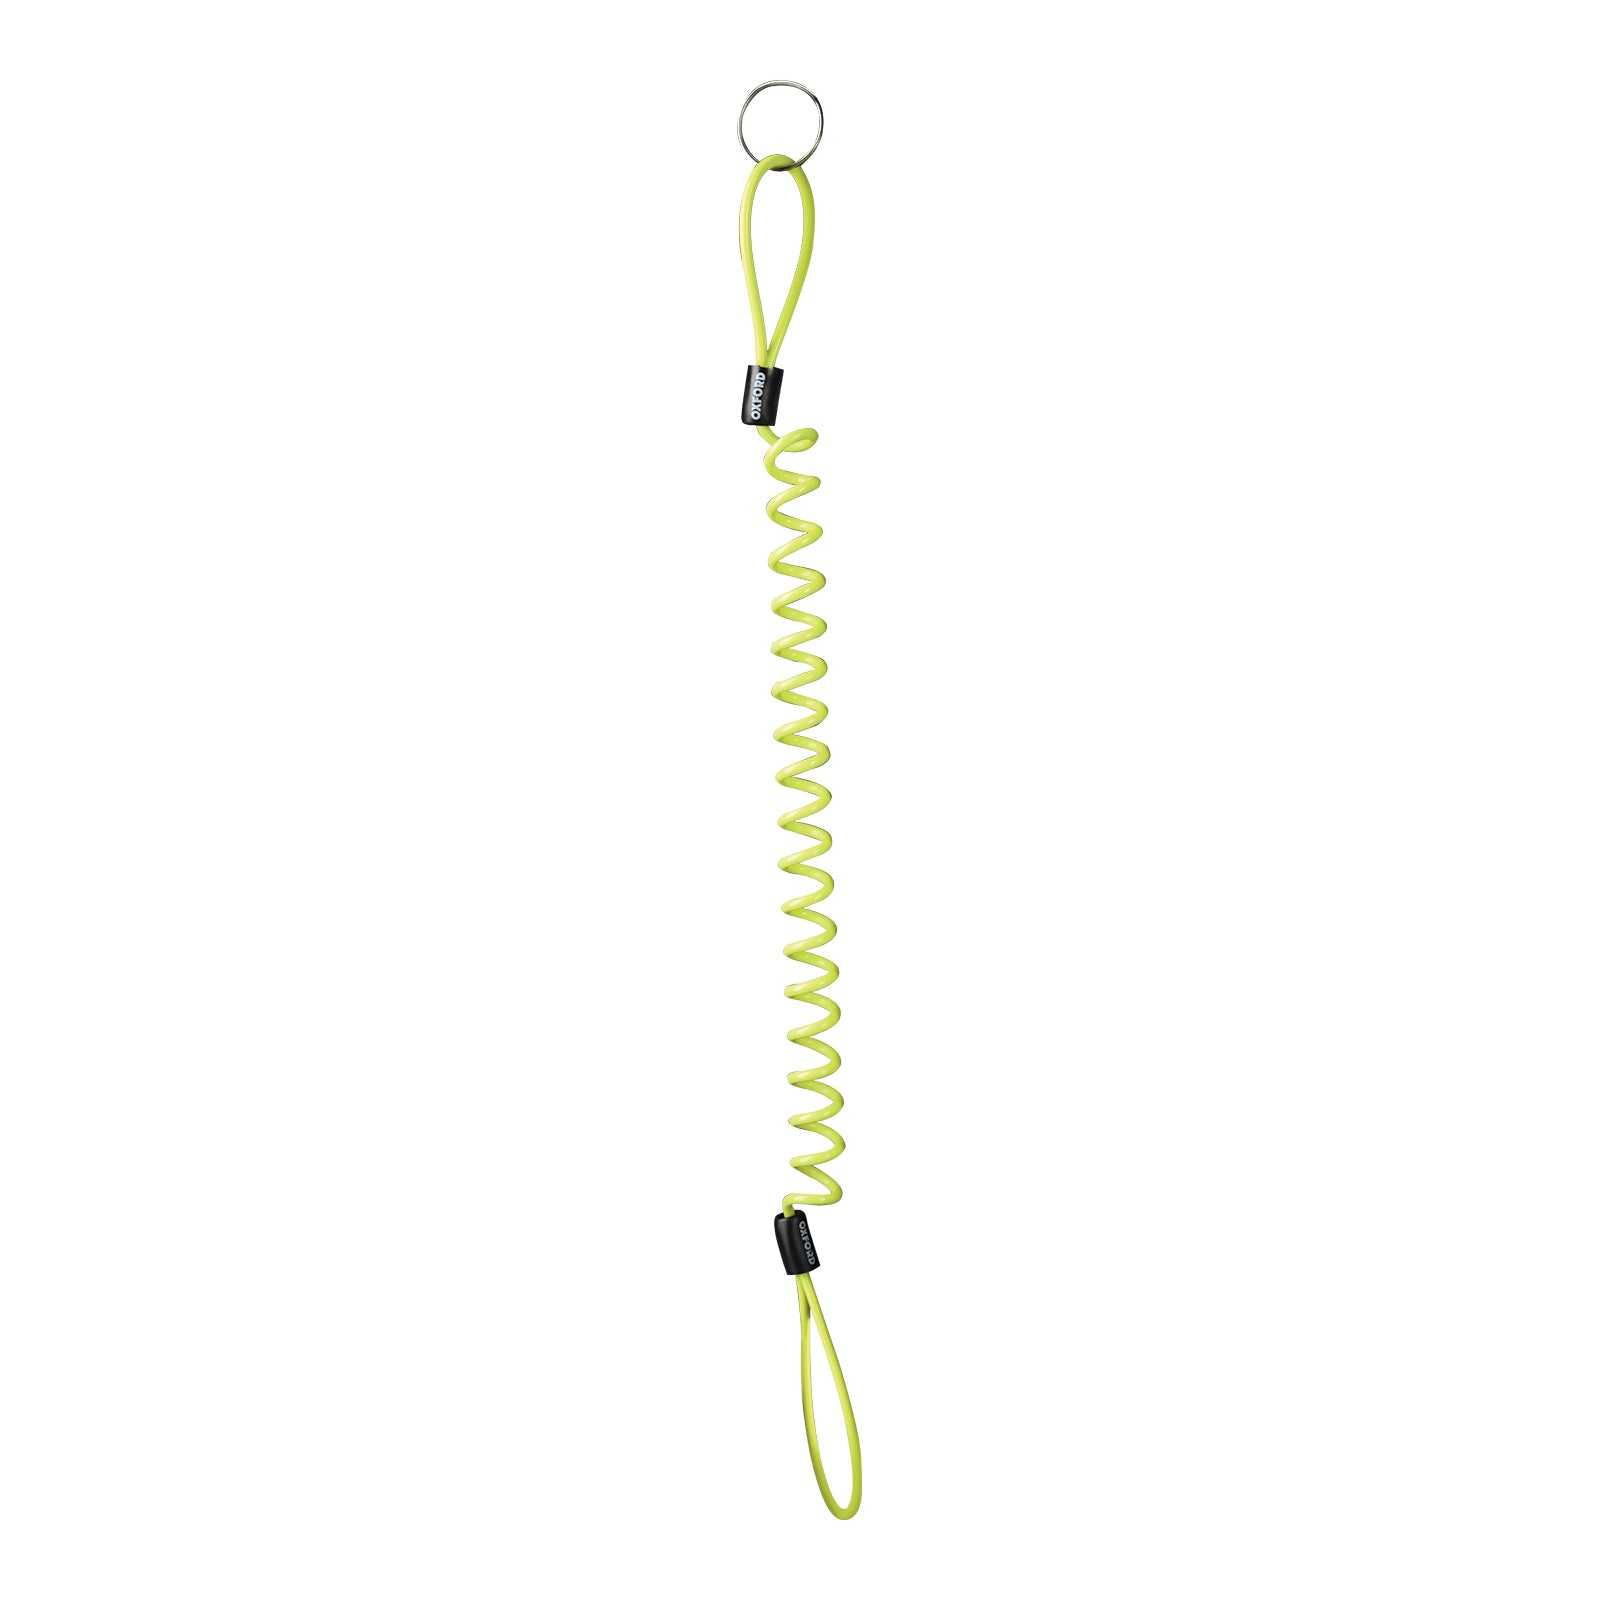 Oxford, Oxford Disc Lock Reminder Cable - Single